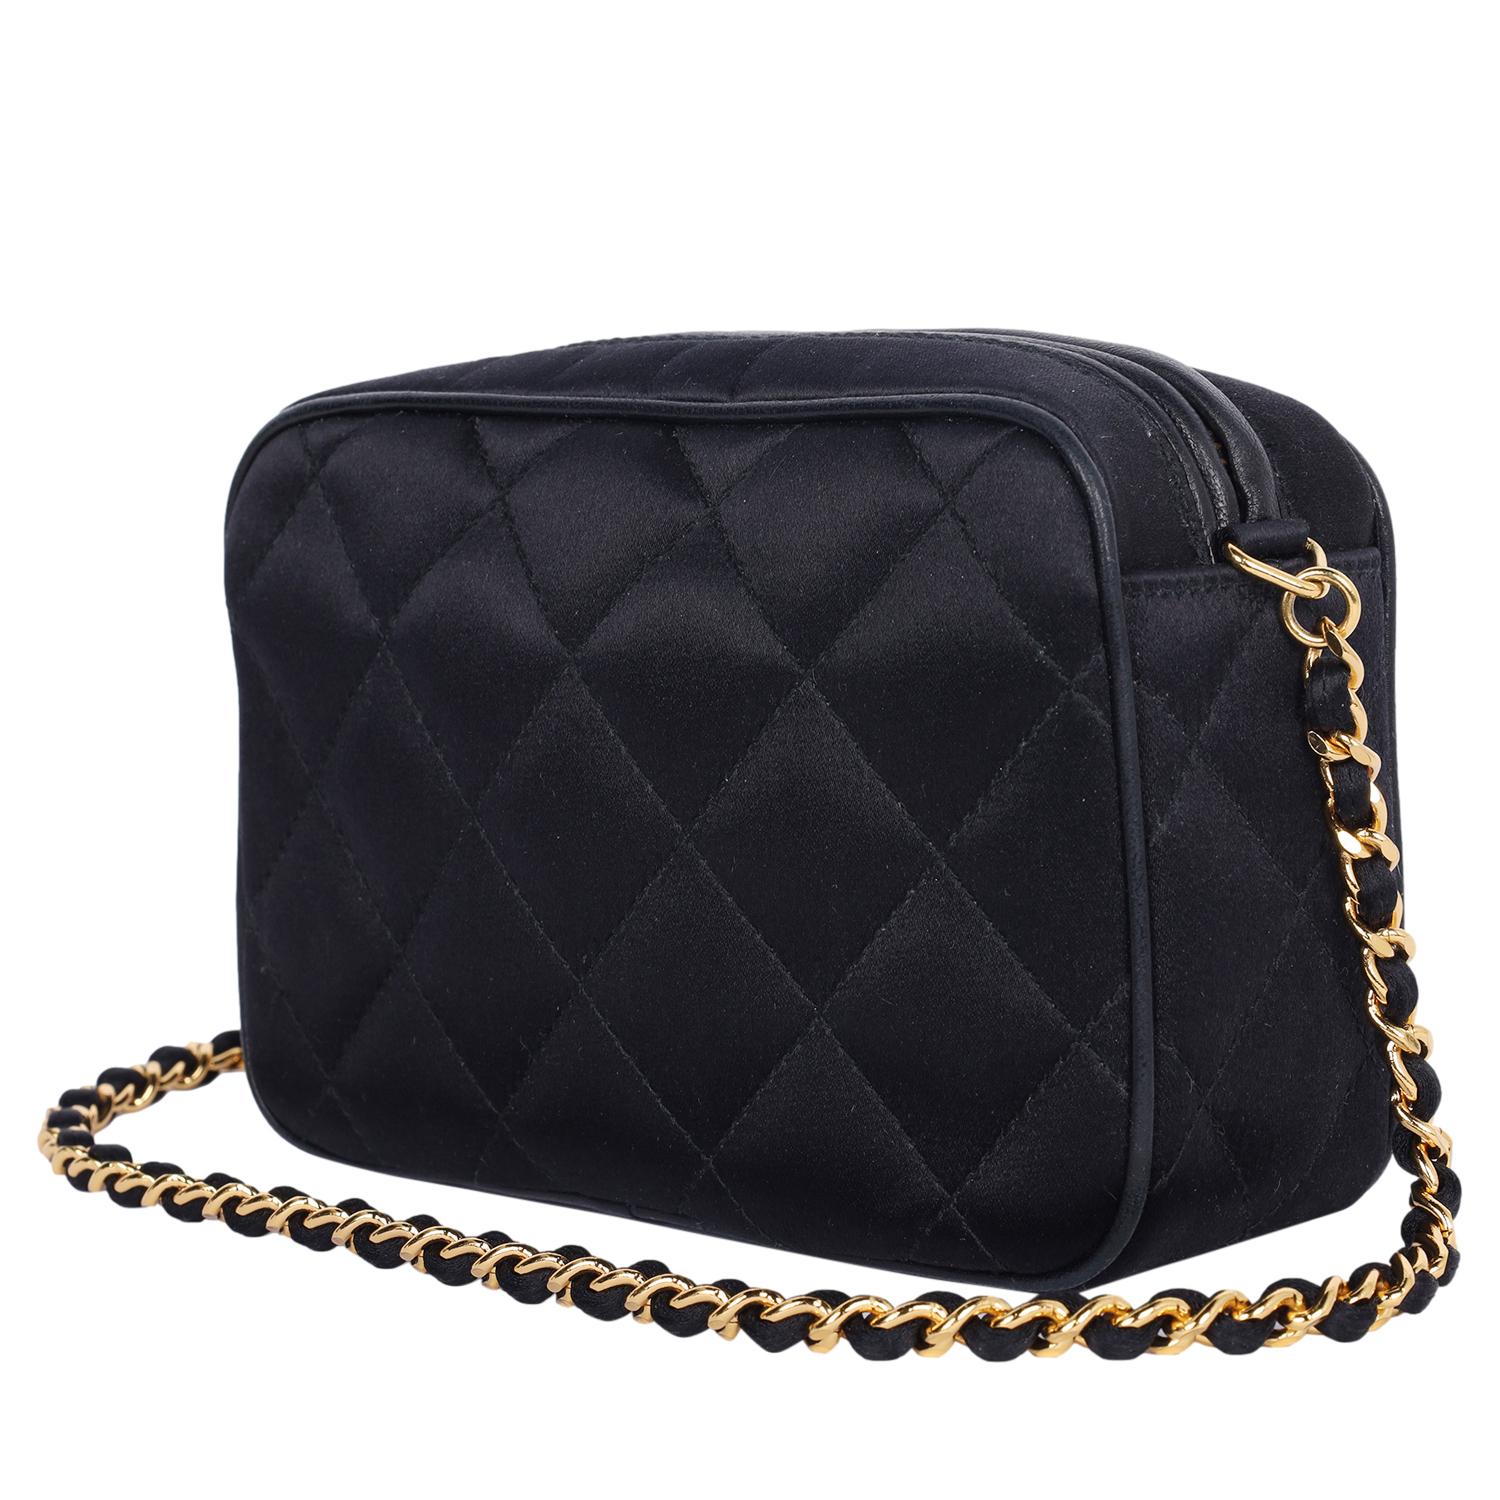 Chanel Mini Satin Leather Quilted Camera Cross Body Bag 1996 For Sale 2